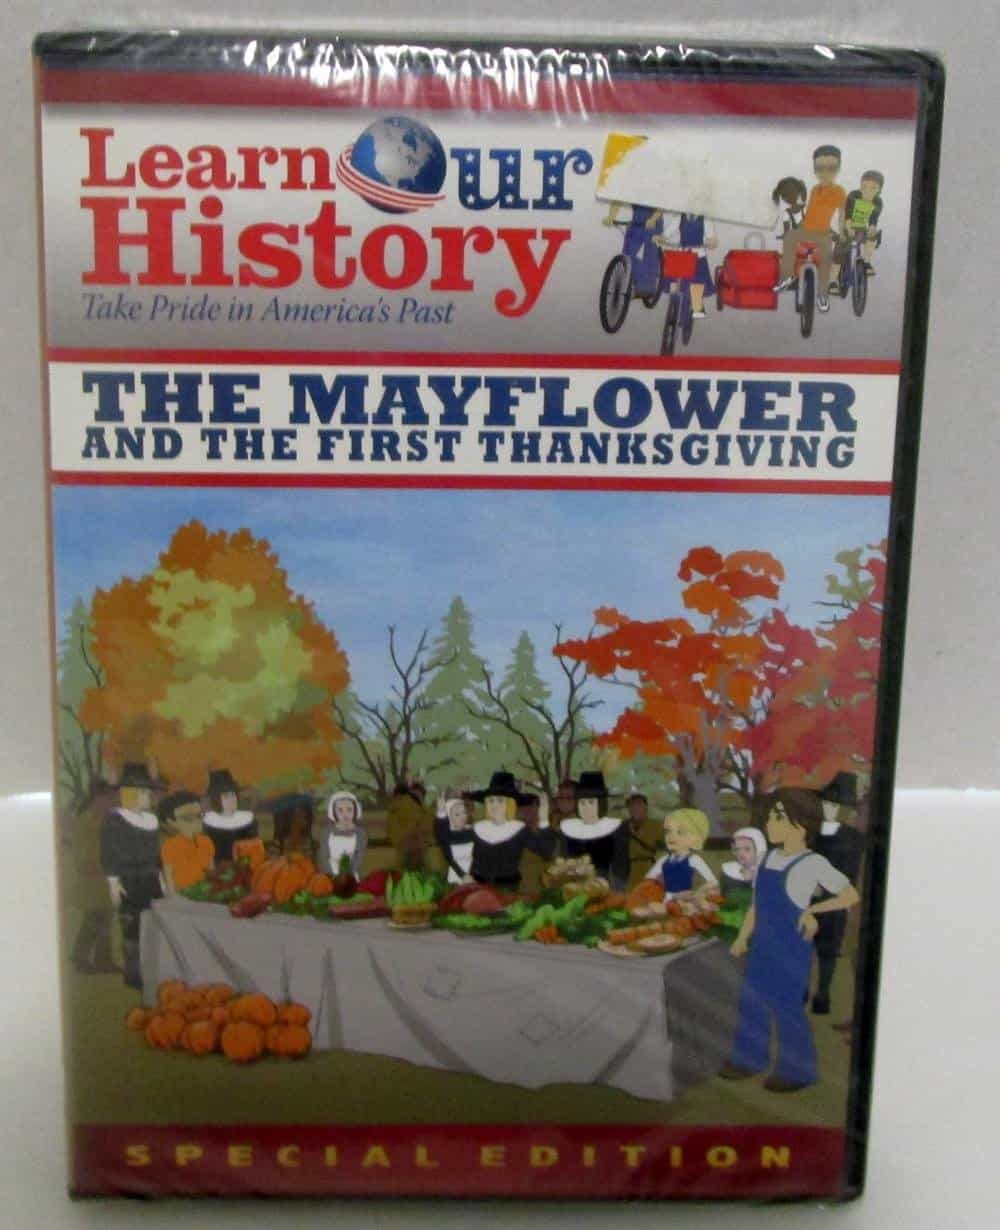 Mike Huckabee's Thanksgiving Cartoon from the Learn Our History series